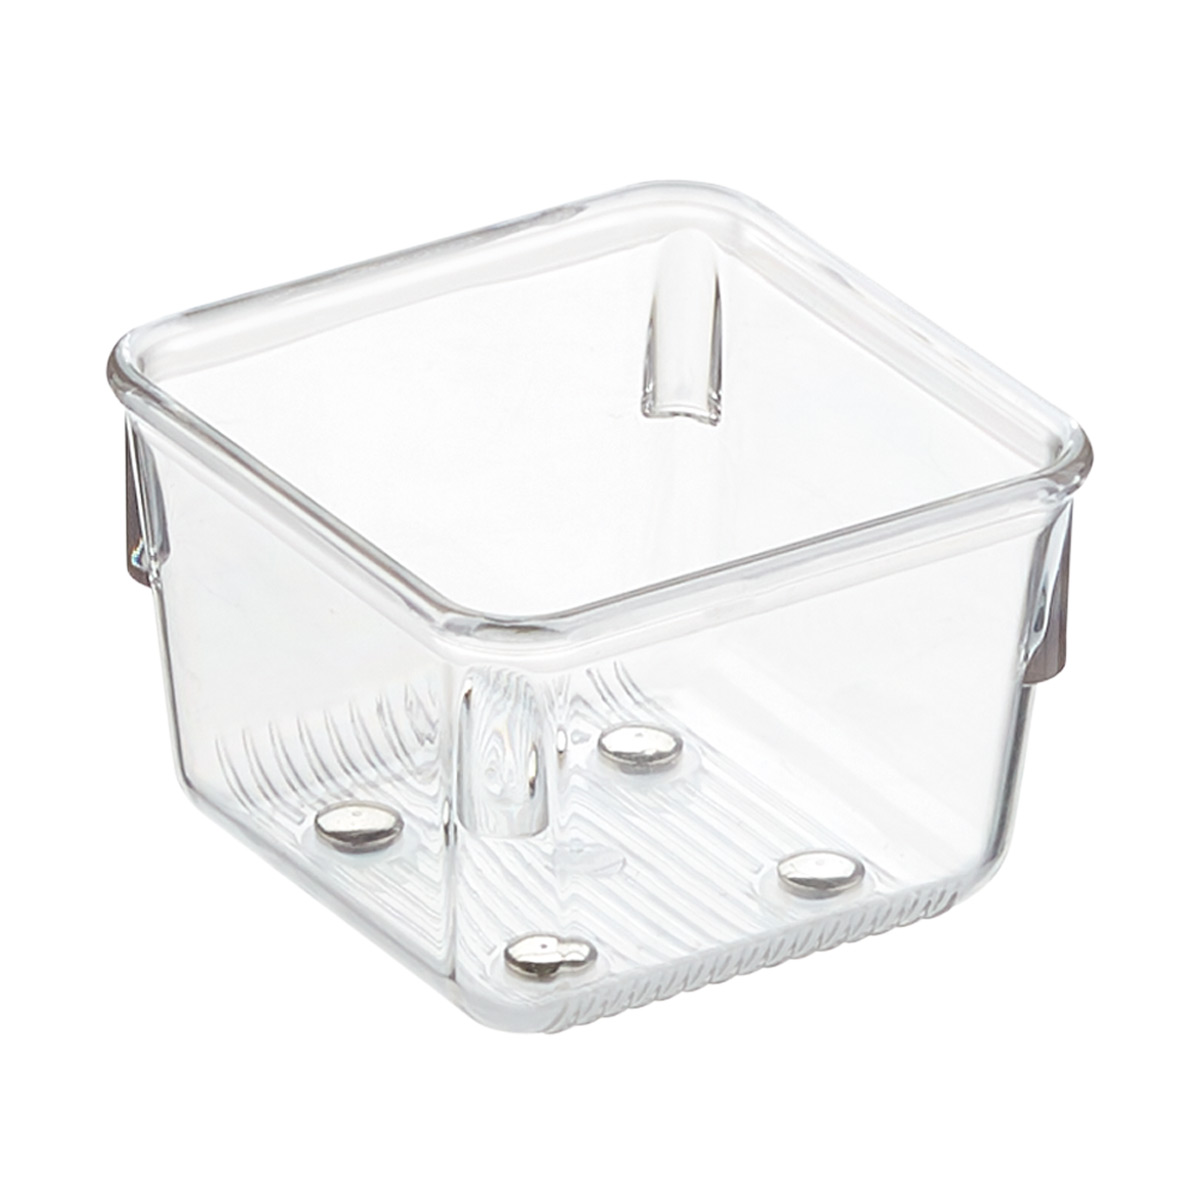 https://images.containerstore.com/catalogimages?sku=10036925